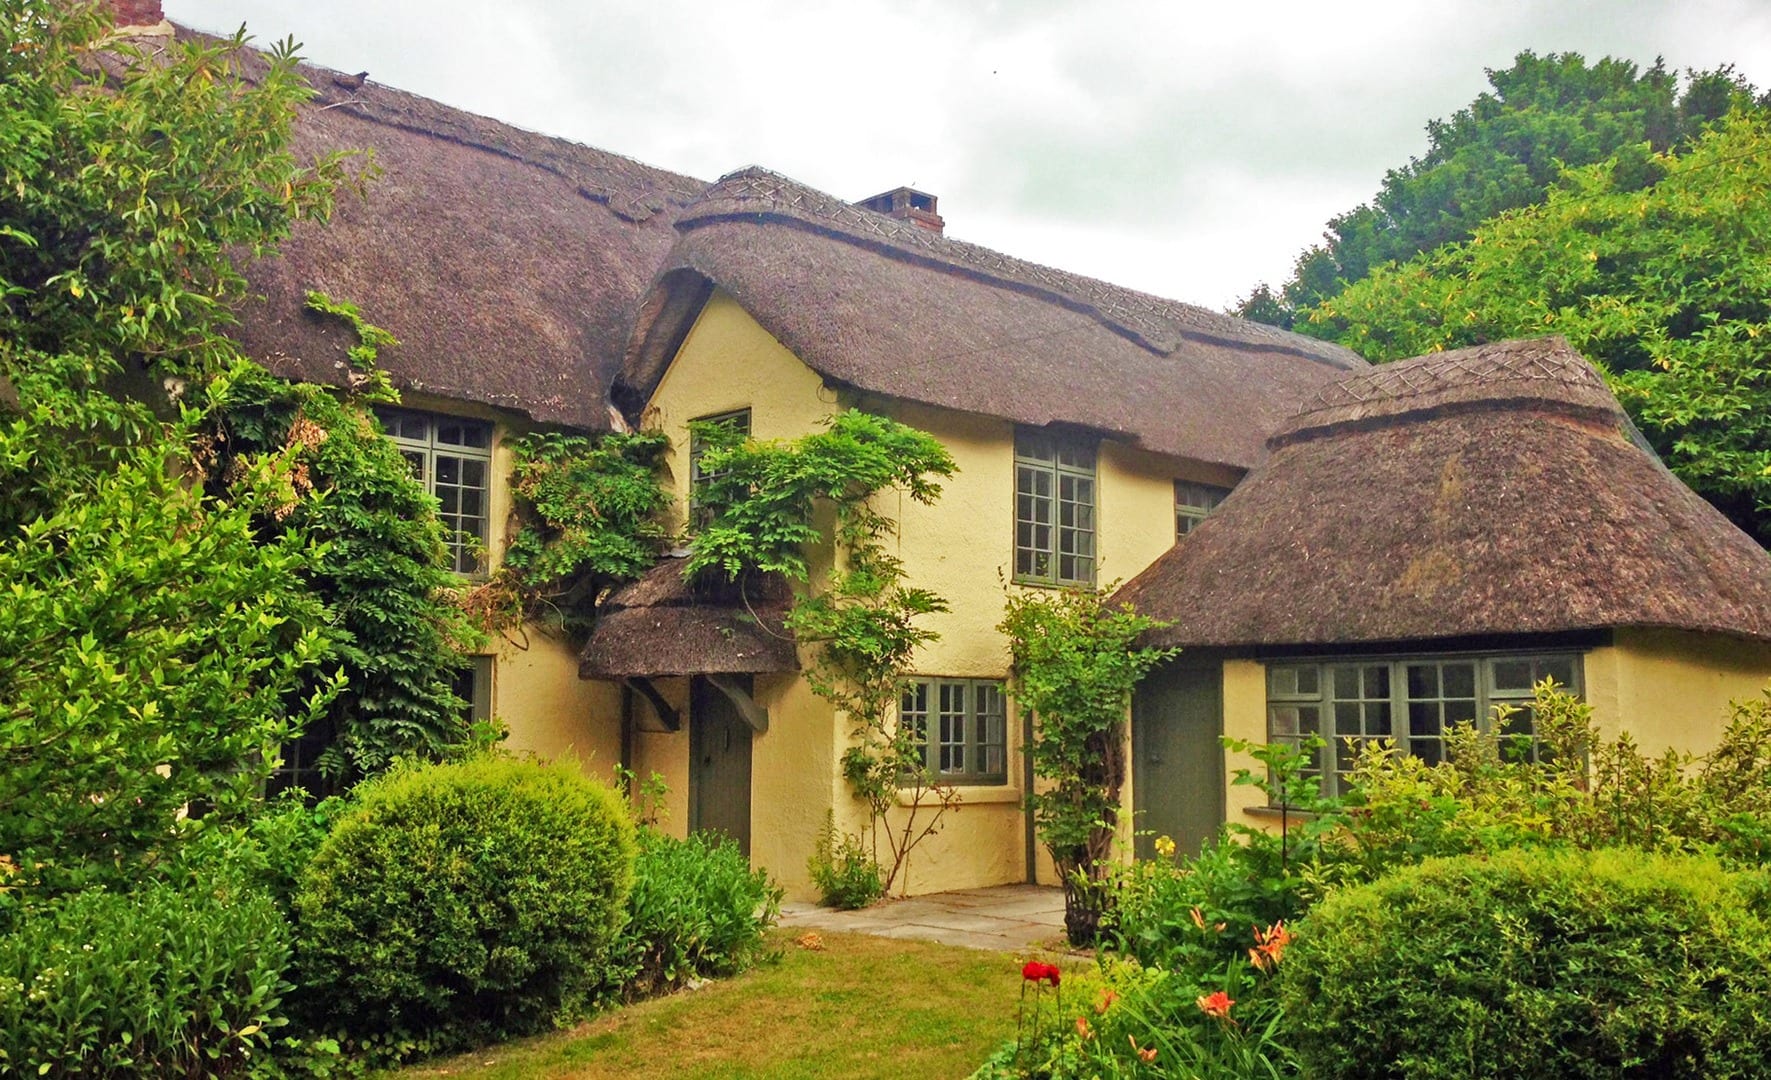 Pretty thatched cottage with roses and shrubs